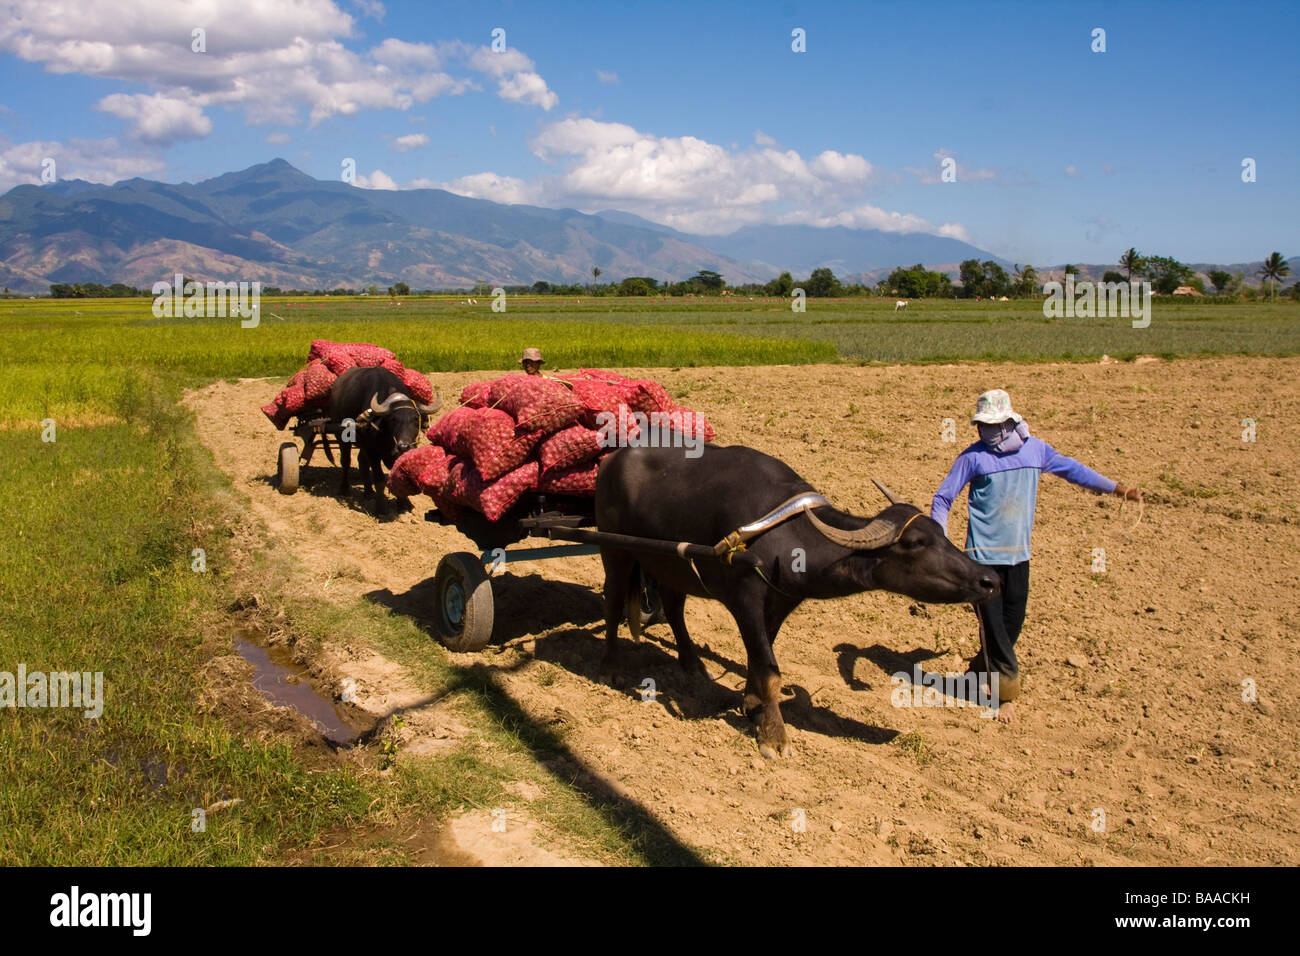 A farmer leading a farm animal pulling a load of harvested onions Stock Photo